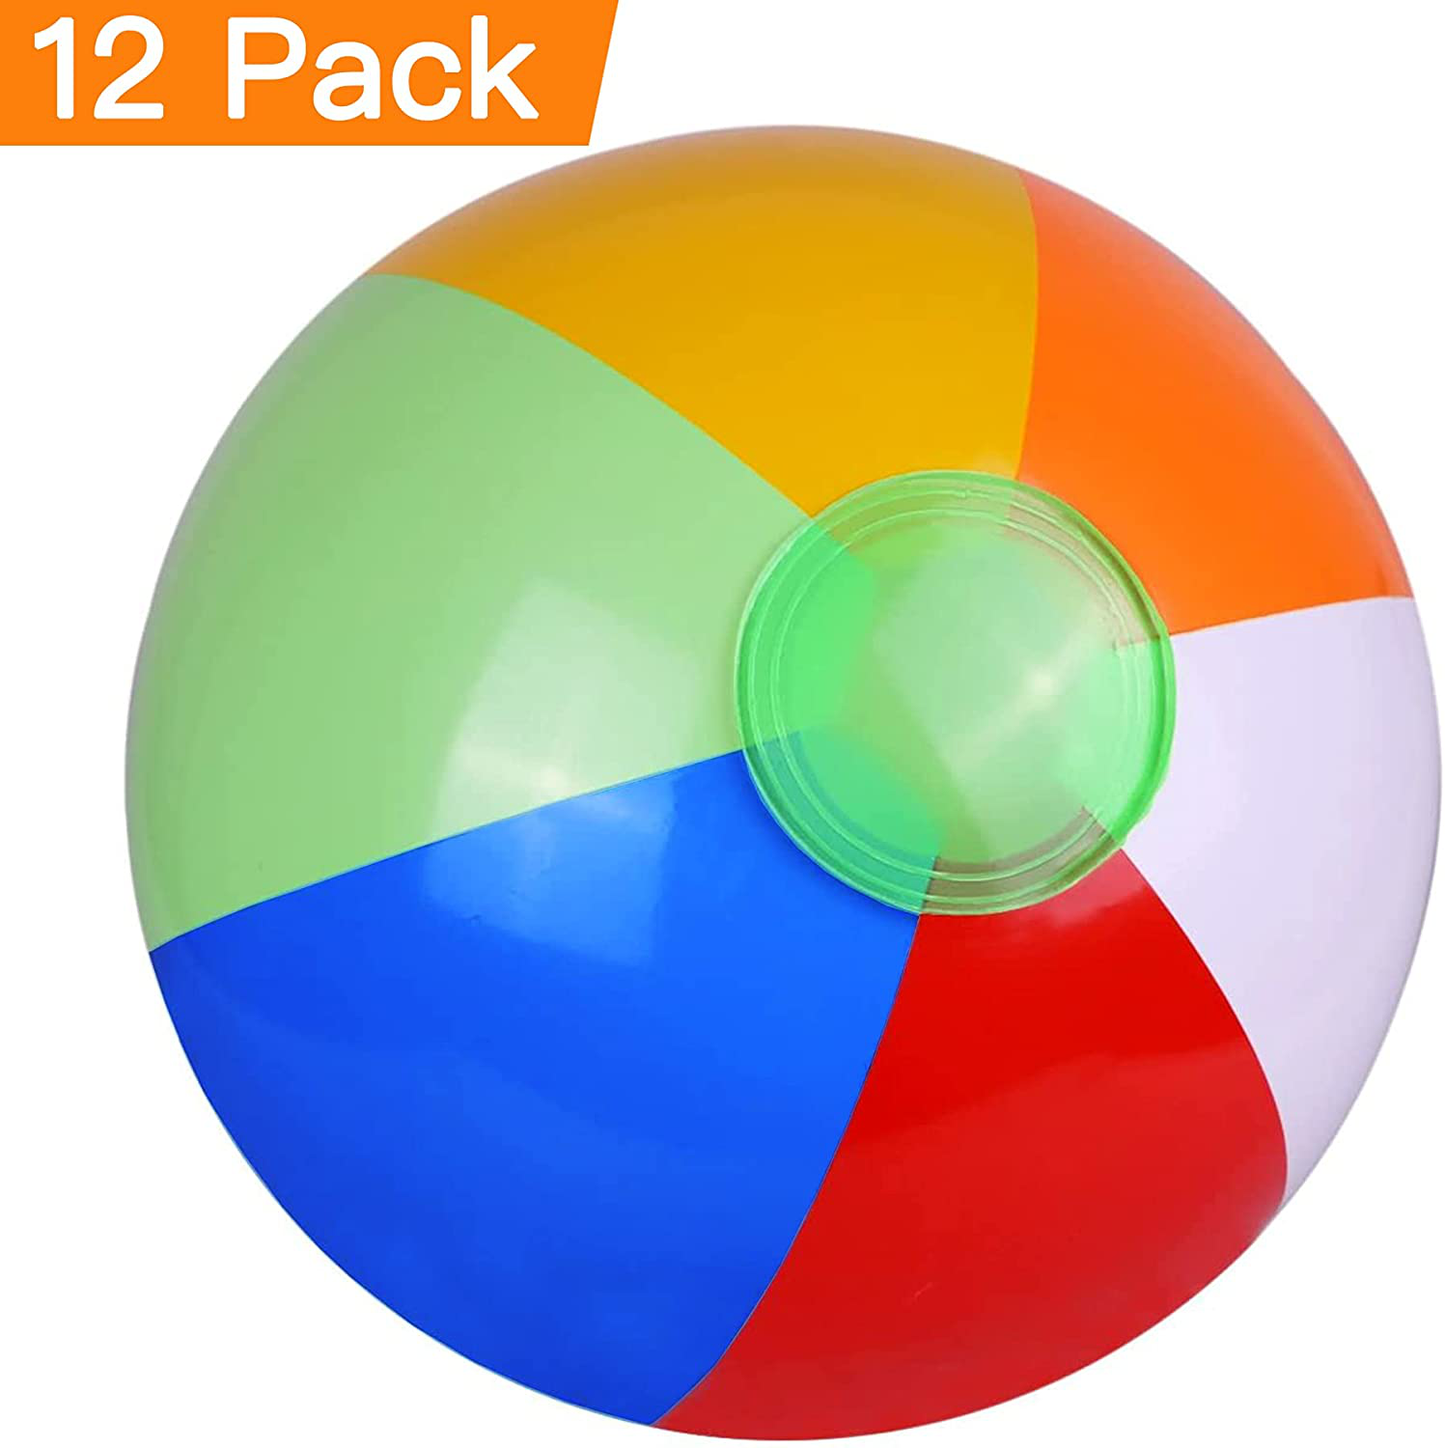 SYZ 12" Beach Balls Bulk - Inflatable Swimming Pool Toys for Kids Birthday Party Supplies Favors Luau Decorations - Blow Up Classic Rainbow Color Beachball Summer Water Games Fun Gifts (12 Pack)